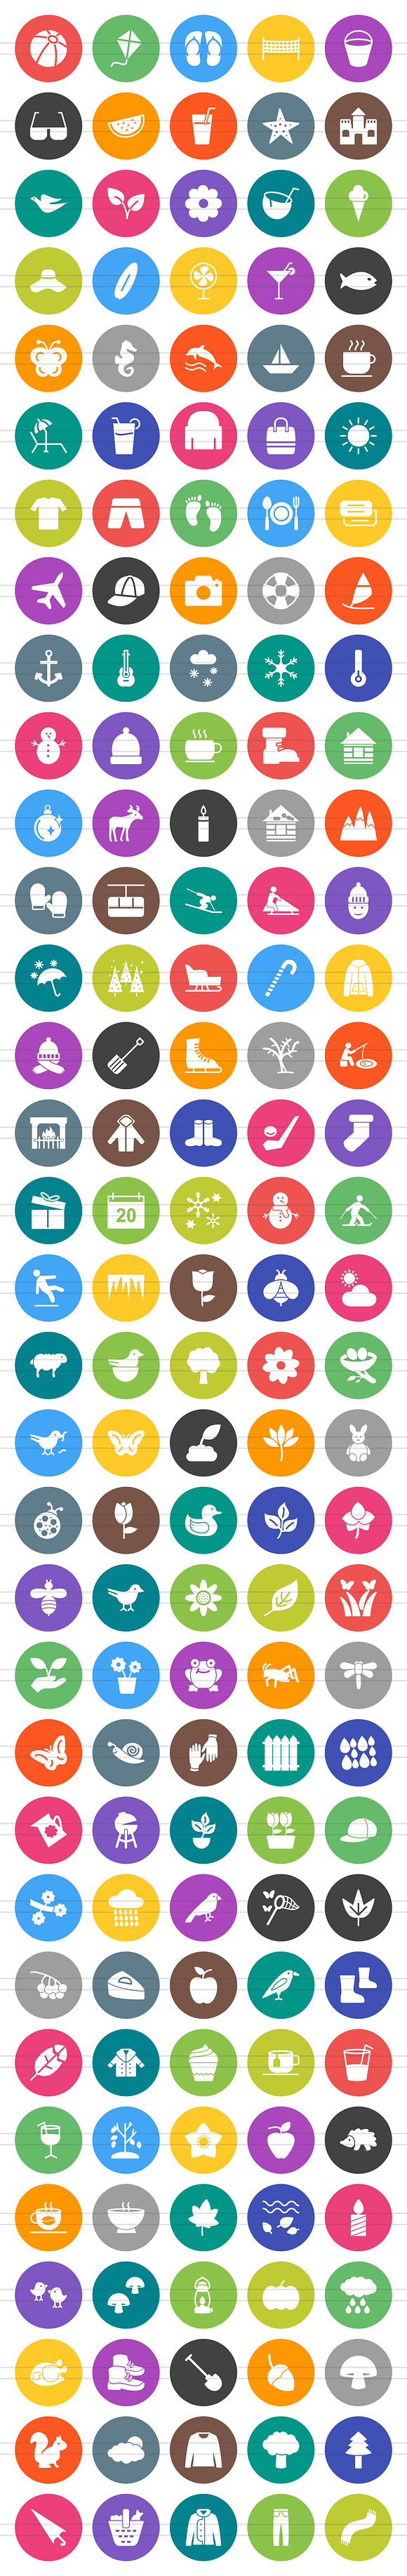 166 Four Seasons Filled Round Icons in Icons - product preview 1